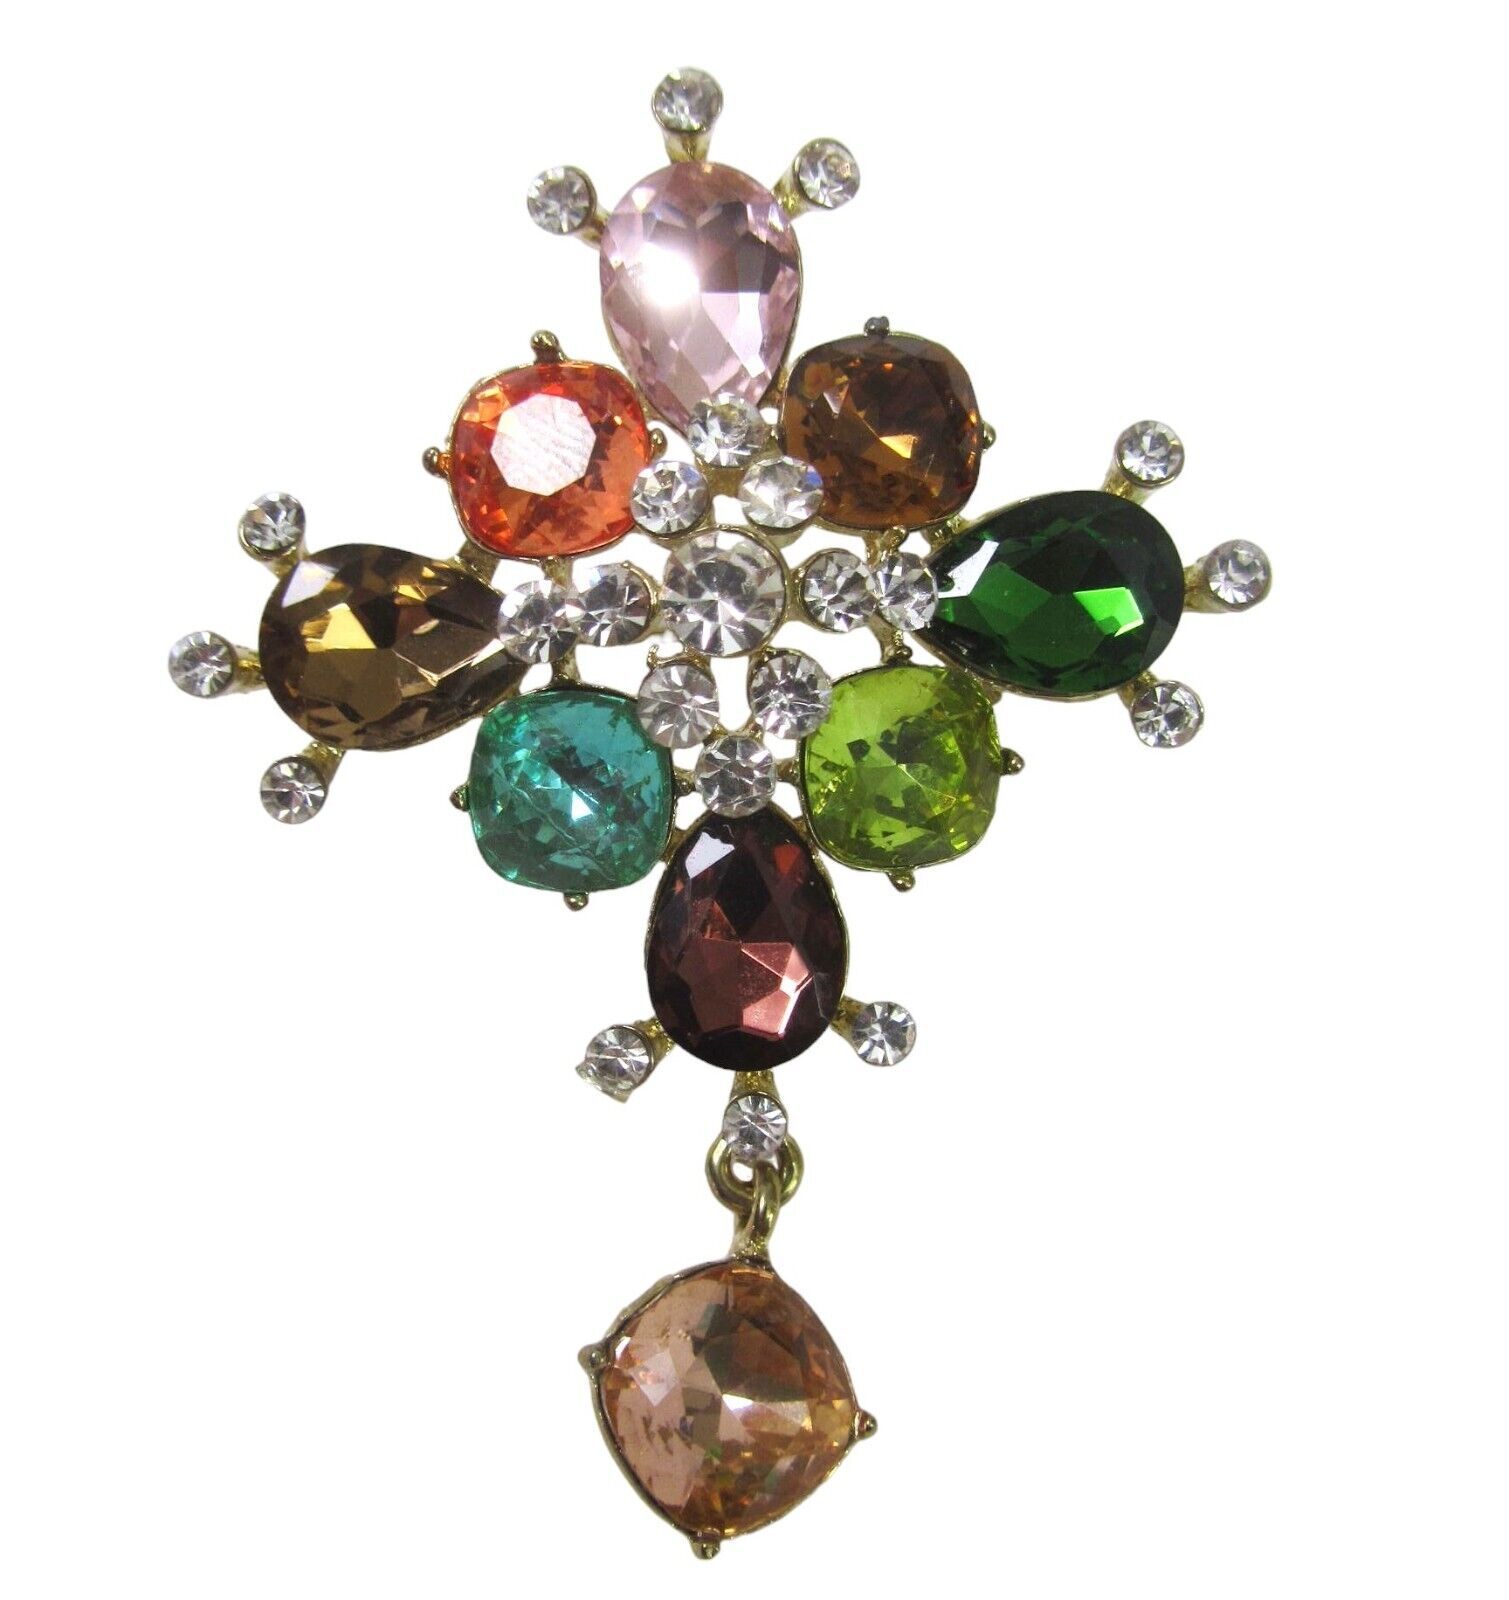 Primary image for Vintage Rhinestone Colorful Dangle Gold Brooch Green Orange Brown Stone 3" large